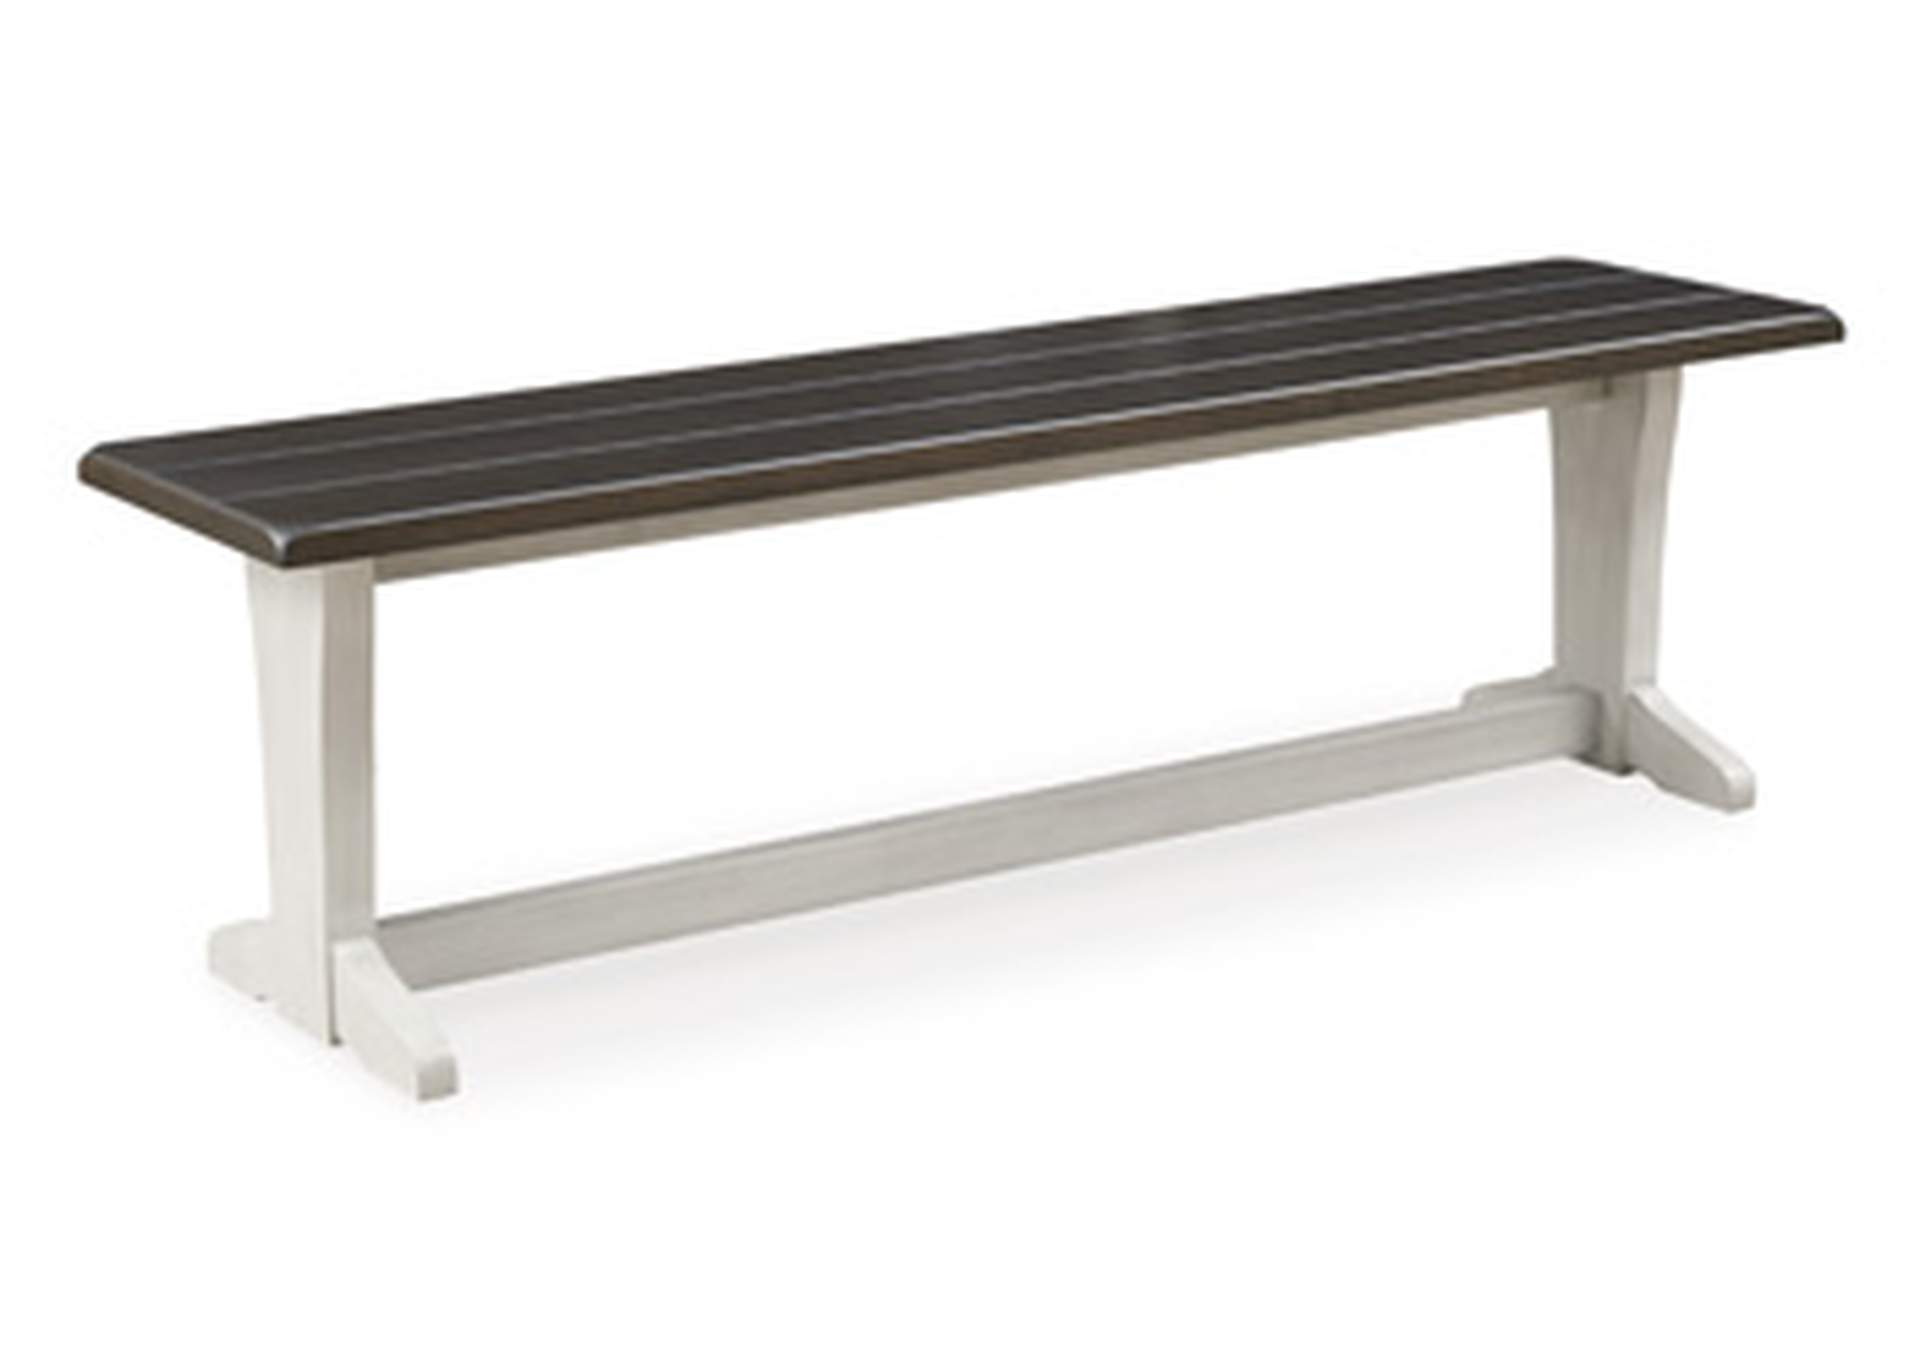 Darborn 62" Dining Bench,Signature Design By Ashley